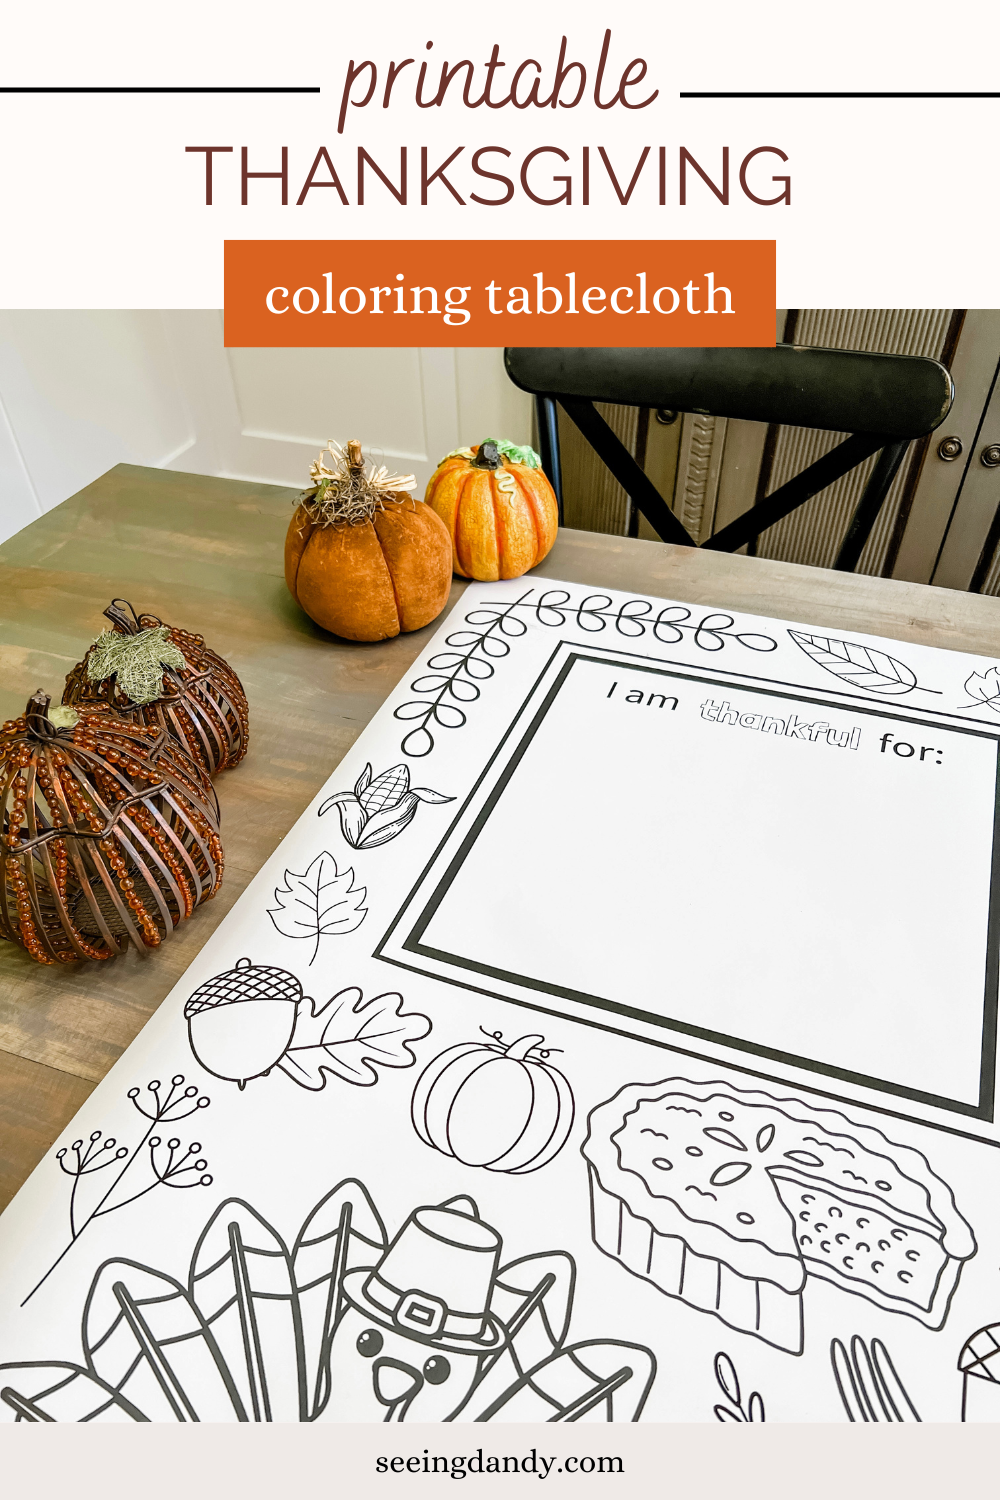 Free printable thanksgiving coloring tablecloth for the kids table